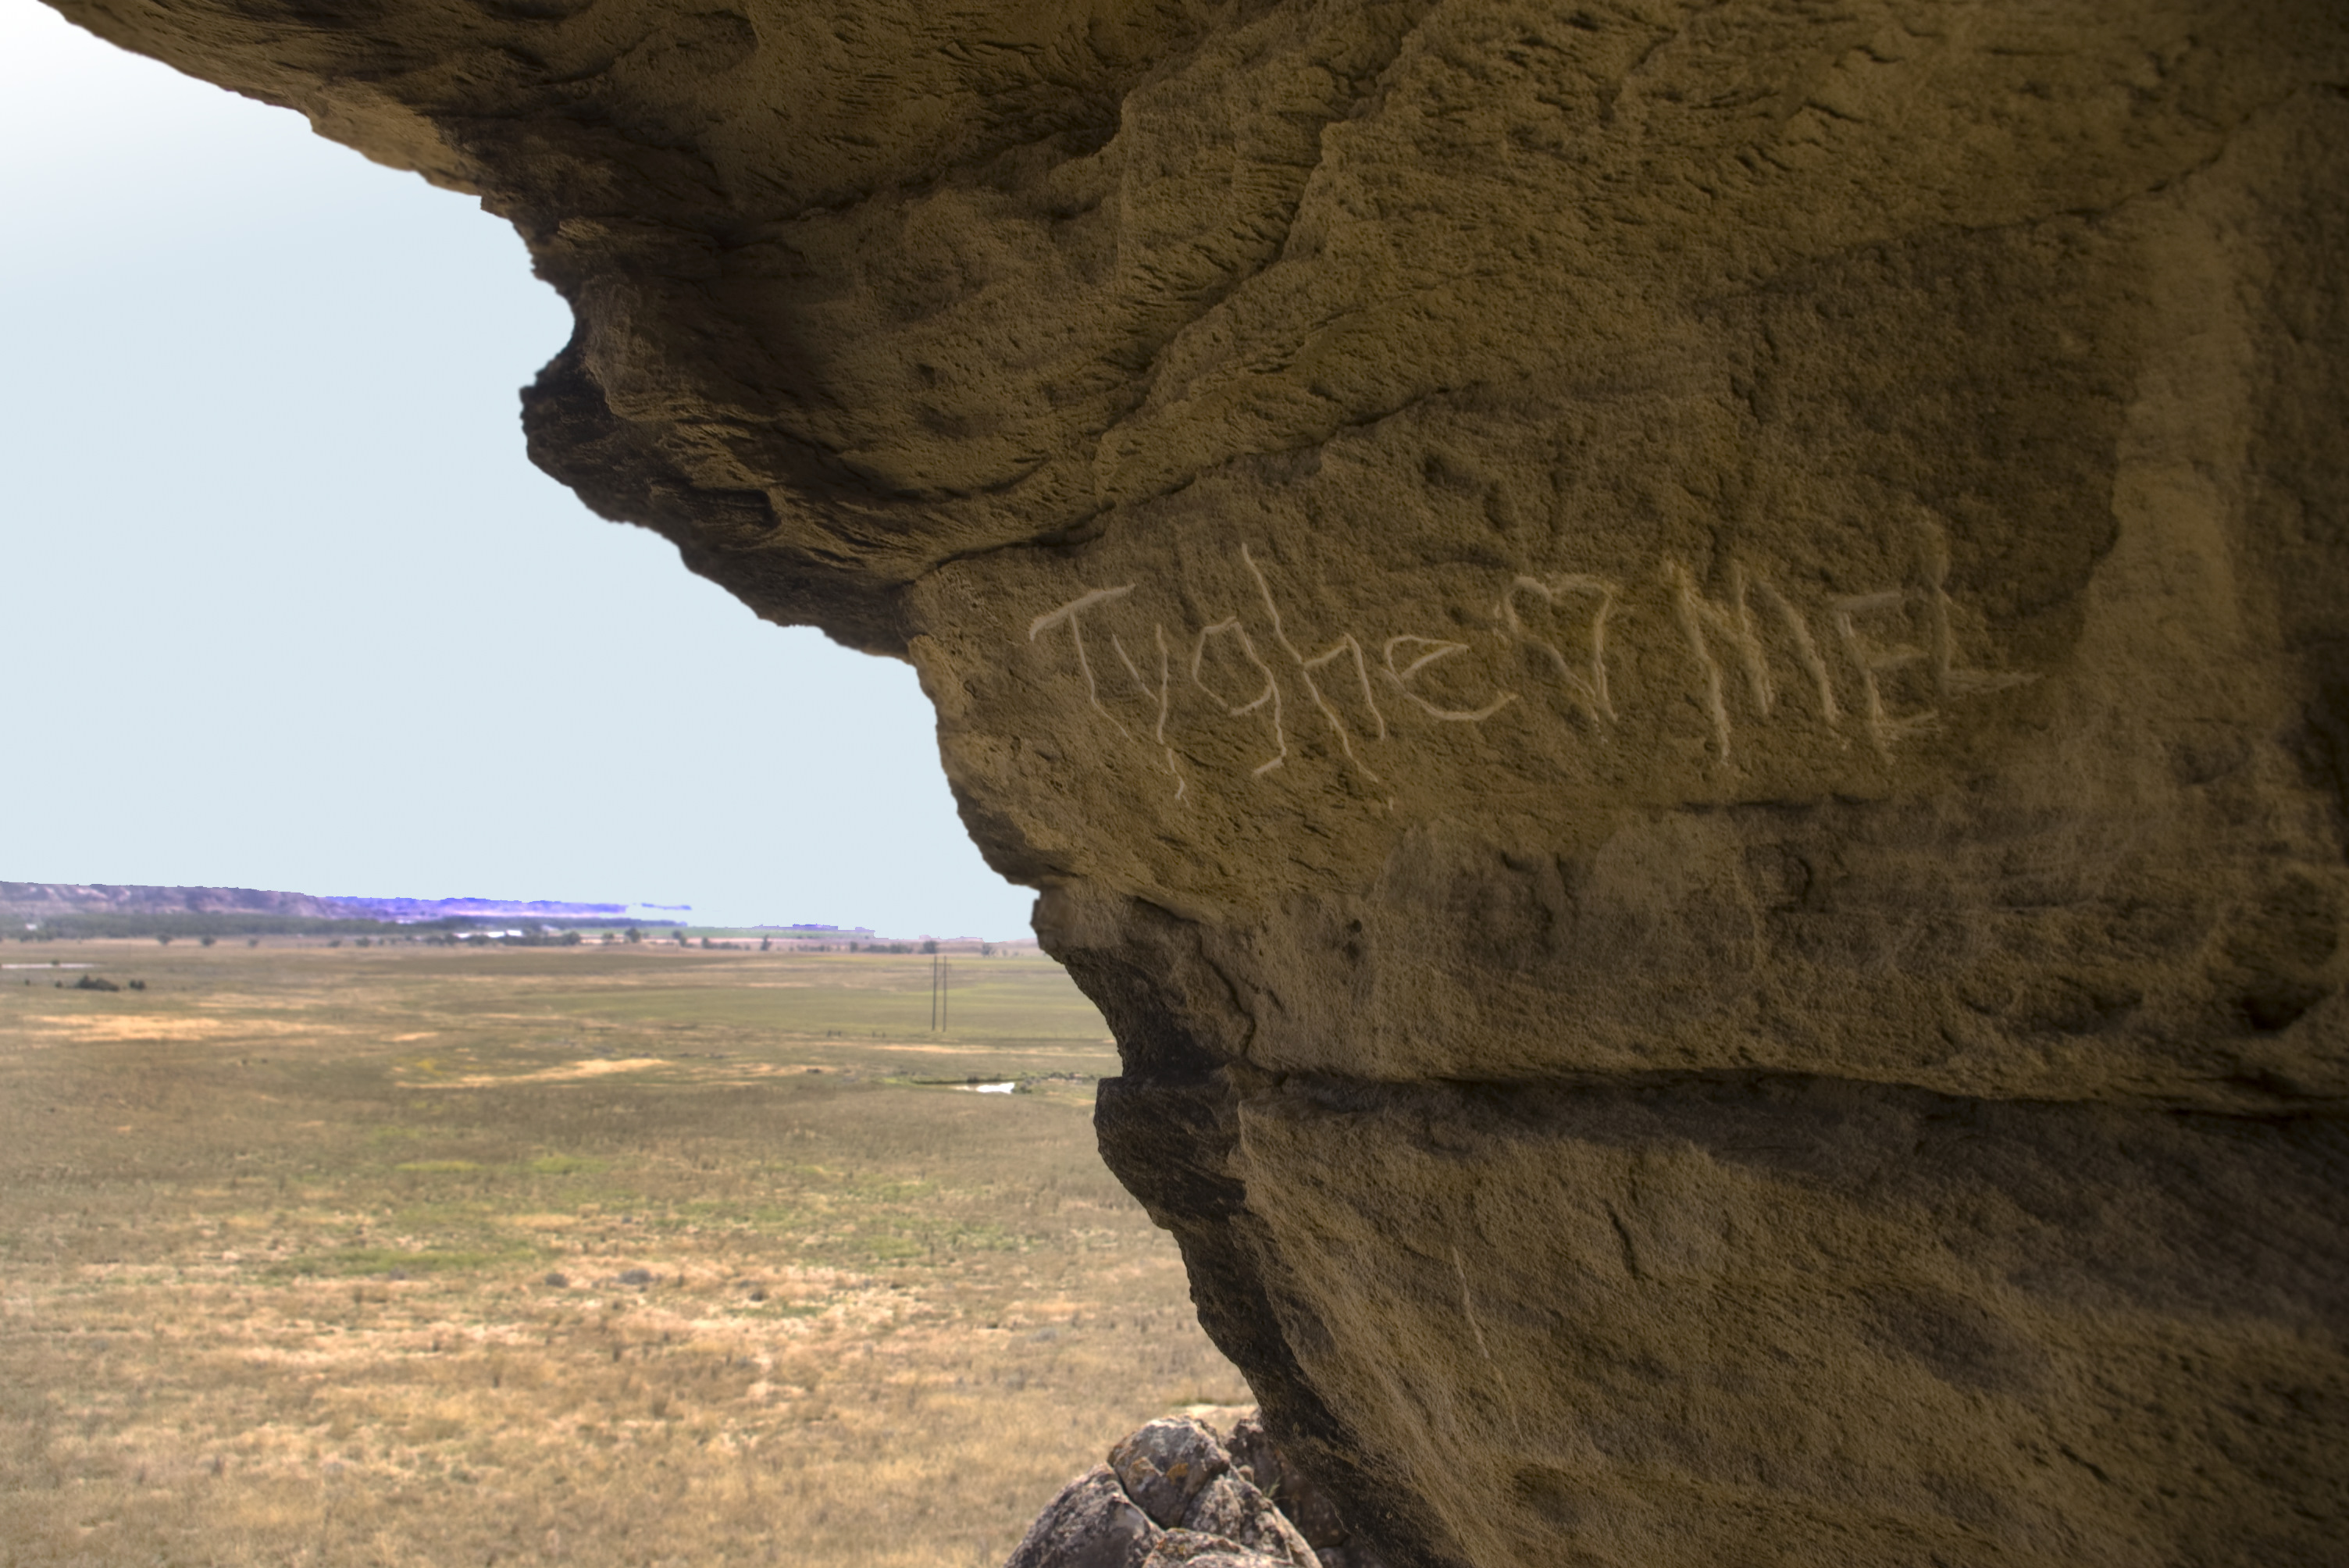 We carved our names in the Cave